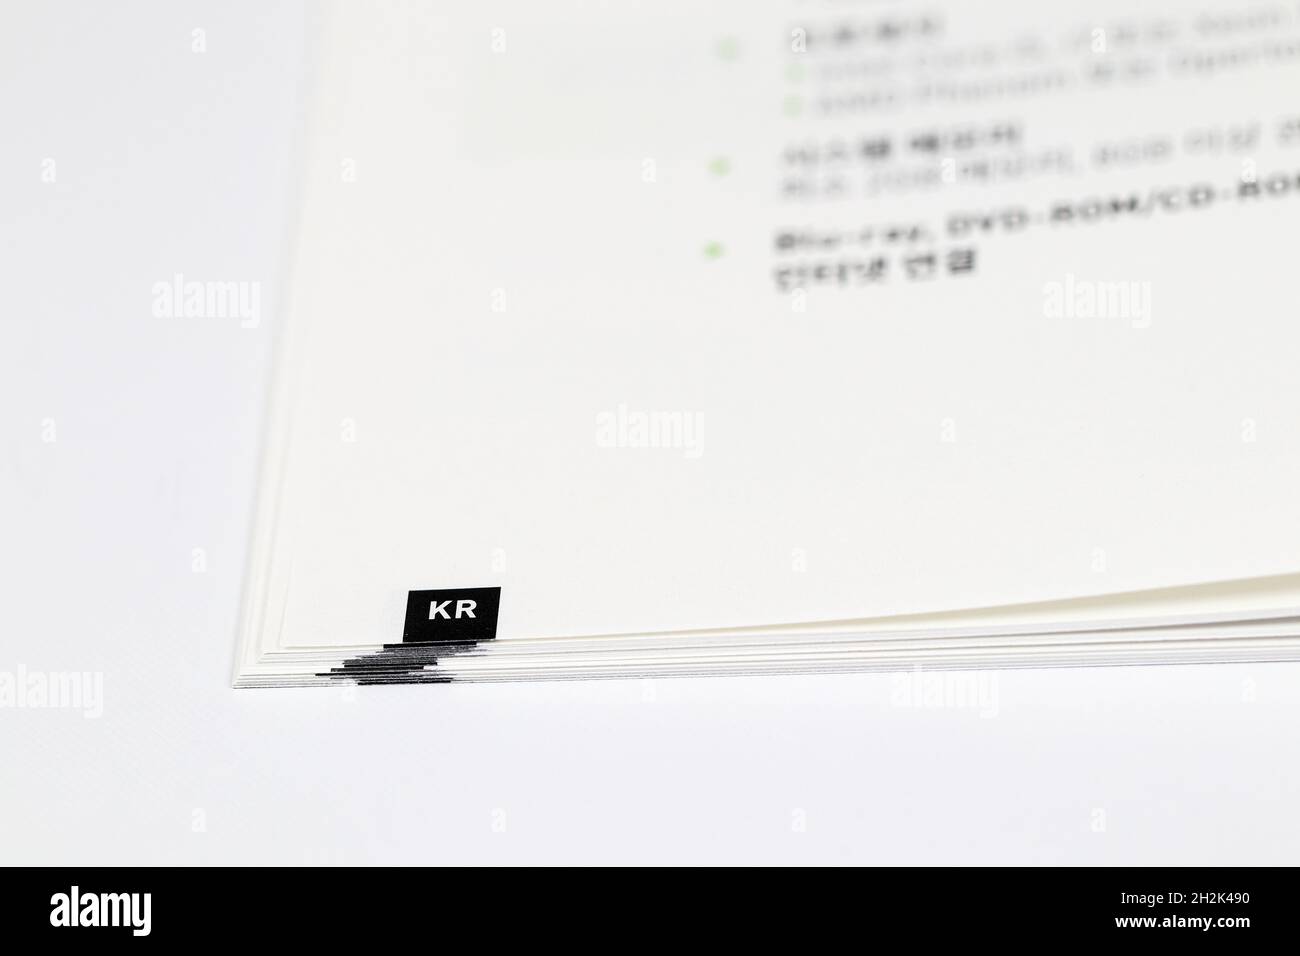 Close-up Of language index on multilingual book or user manual with open pages. KR mean korea Language Book. Stock Photo